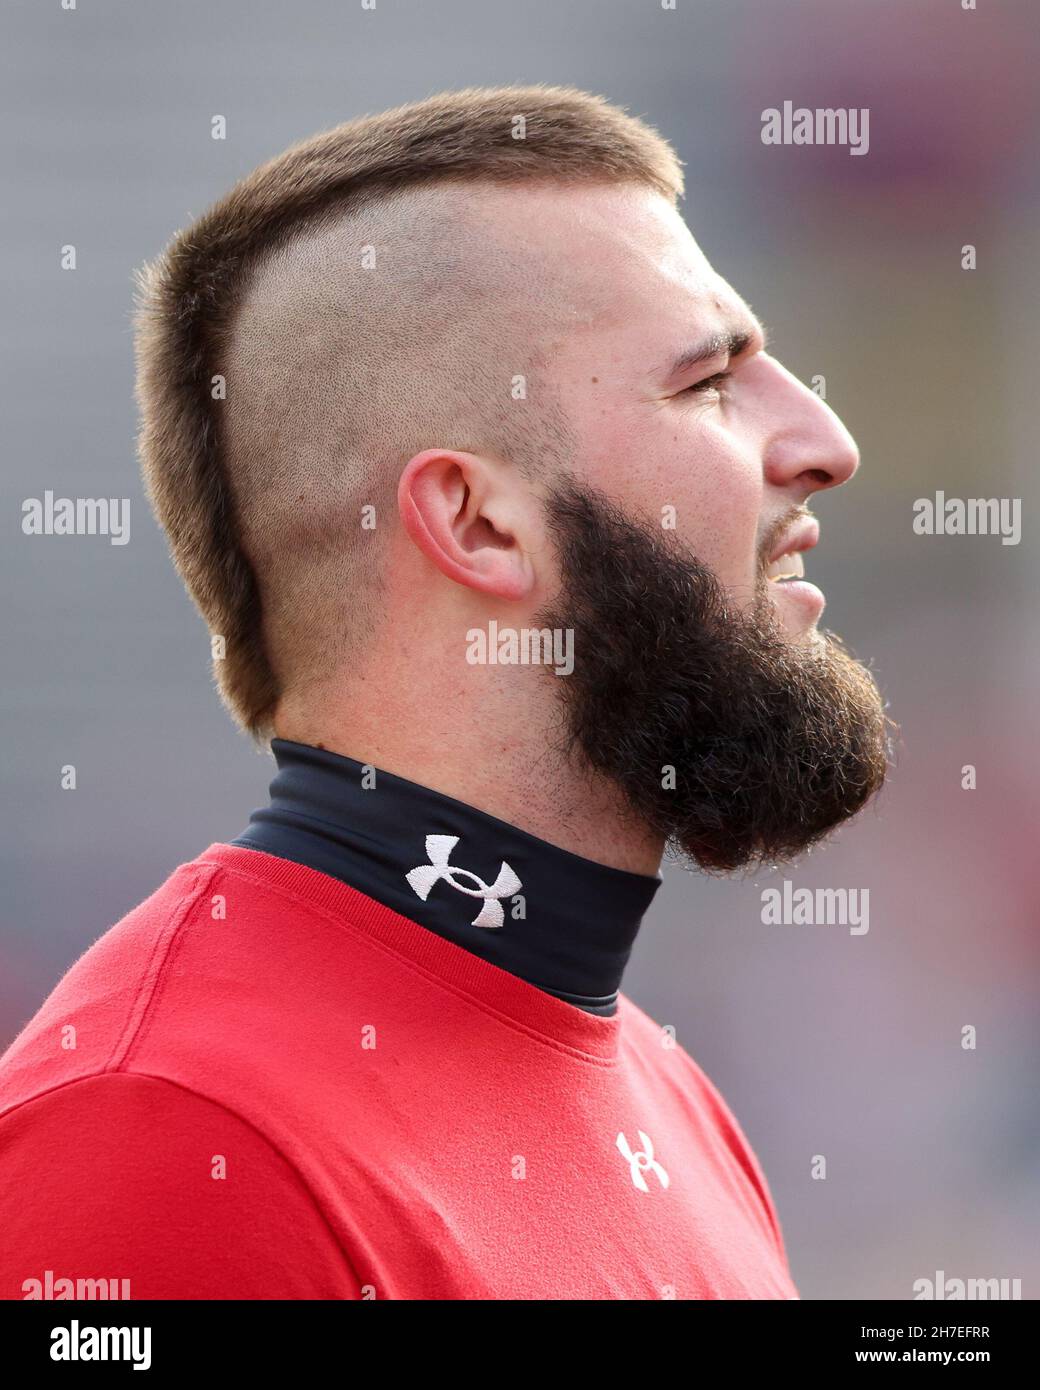 Madison, WI, USA. 20th Nov, 2021. Wisconsin Badgers safety Collin Wilder (18) during the NCAA Football game between the Nebraska Cornhuskers and the Wisconsin Badgers at Camp Randall Stadium in Madison, WI. Darren Lee/CSM/Alamy Live News Stock Photo